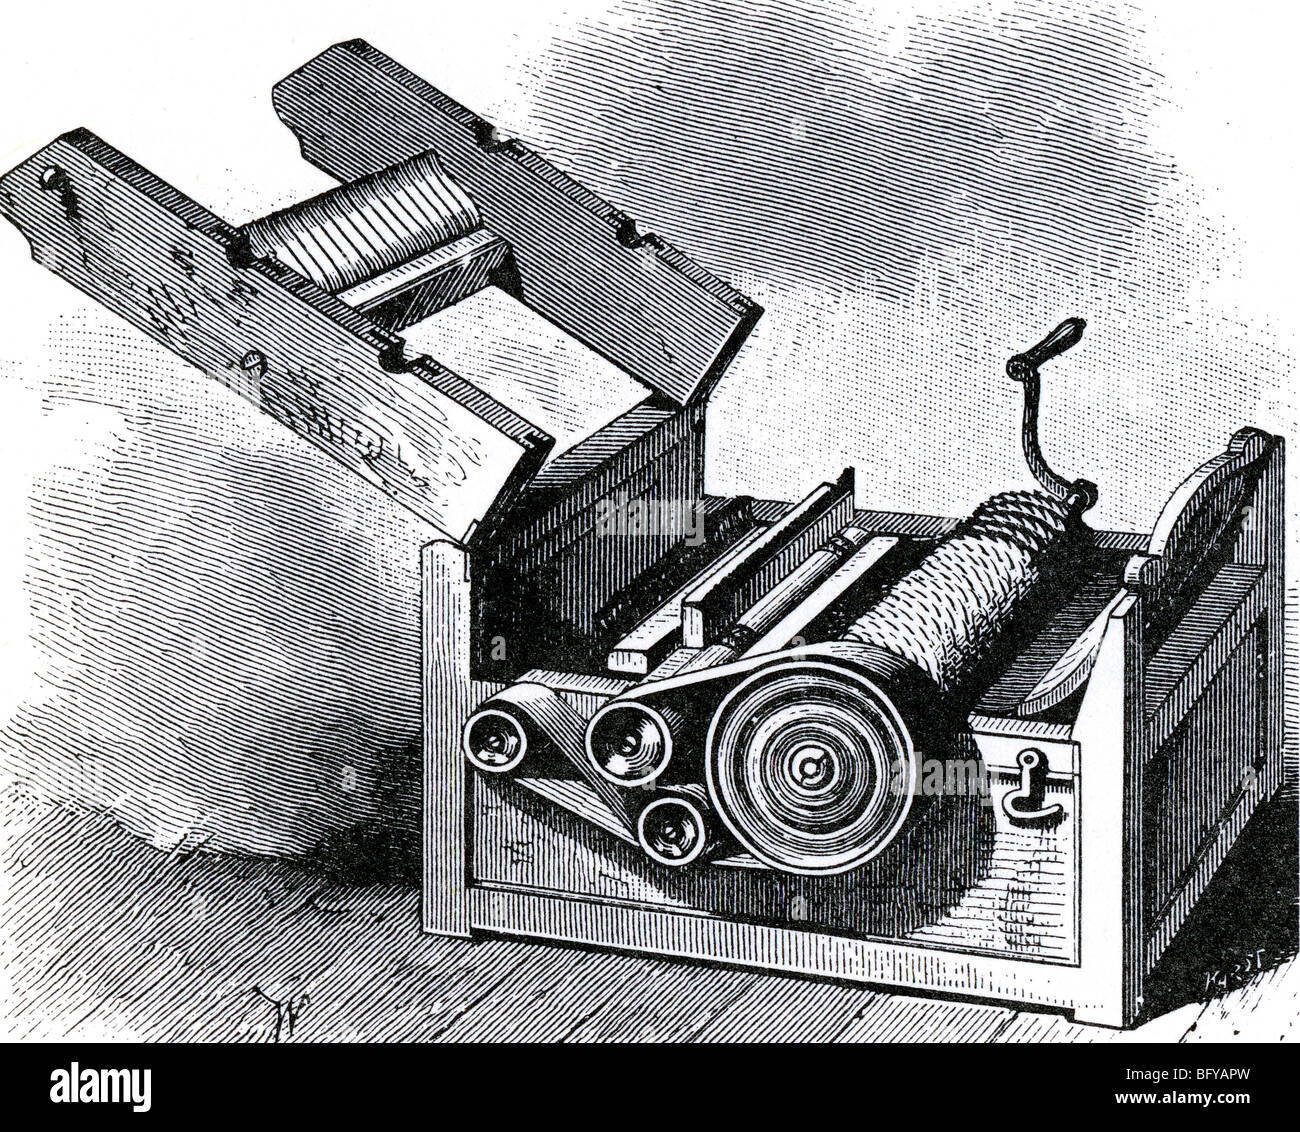 ELI WHITNEY  US inventor (1765-1825) engraving of his Cotton Gin which separated the cotton fibre from the seeds Stock Photo